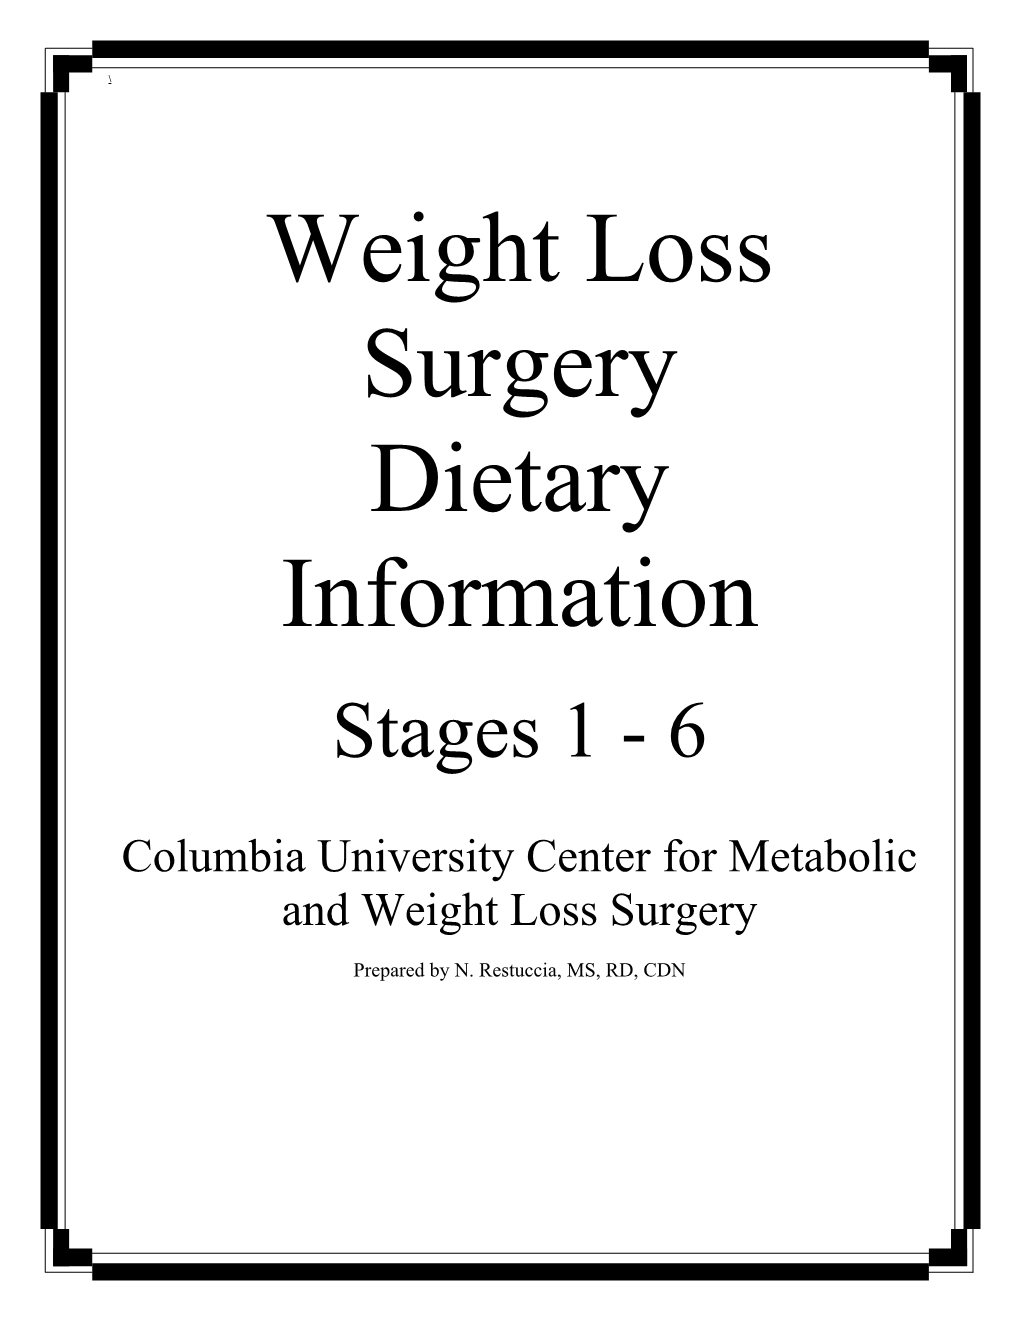 Weight Loss Surgery Dietary Information Stages